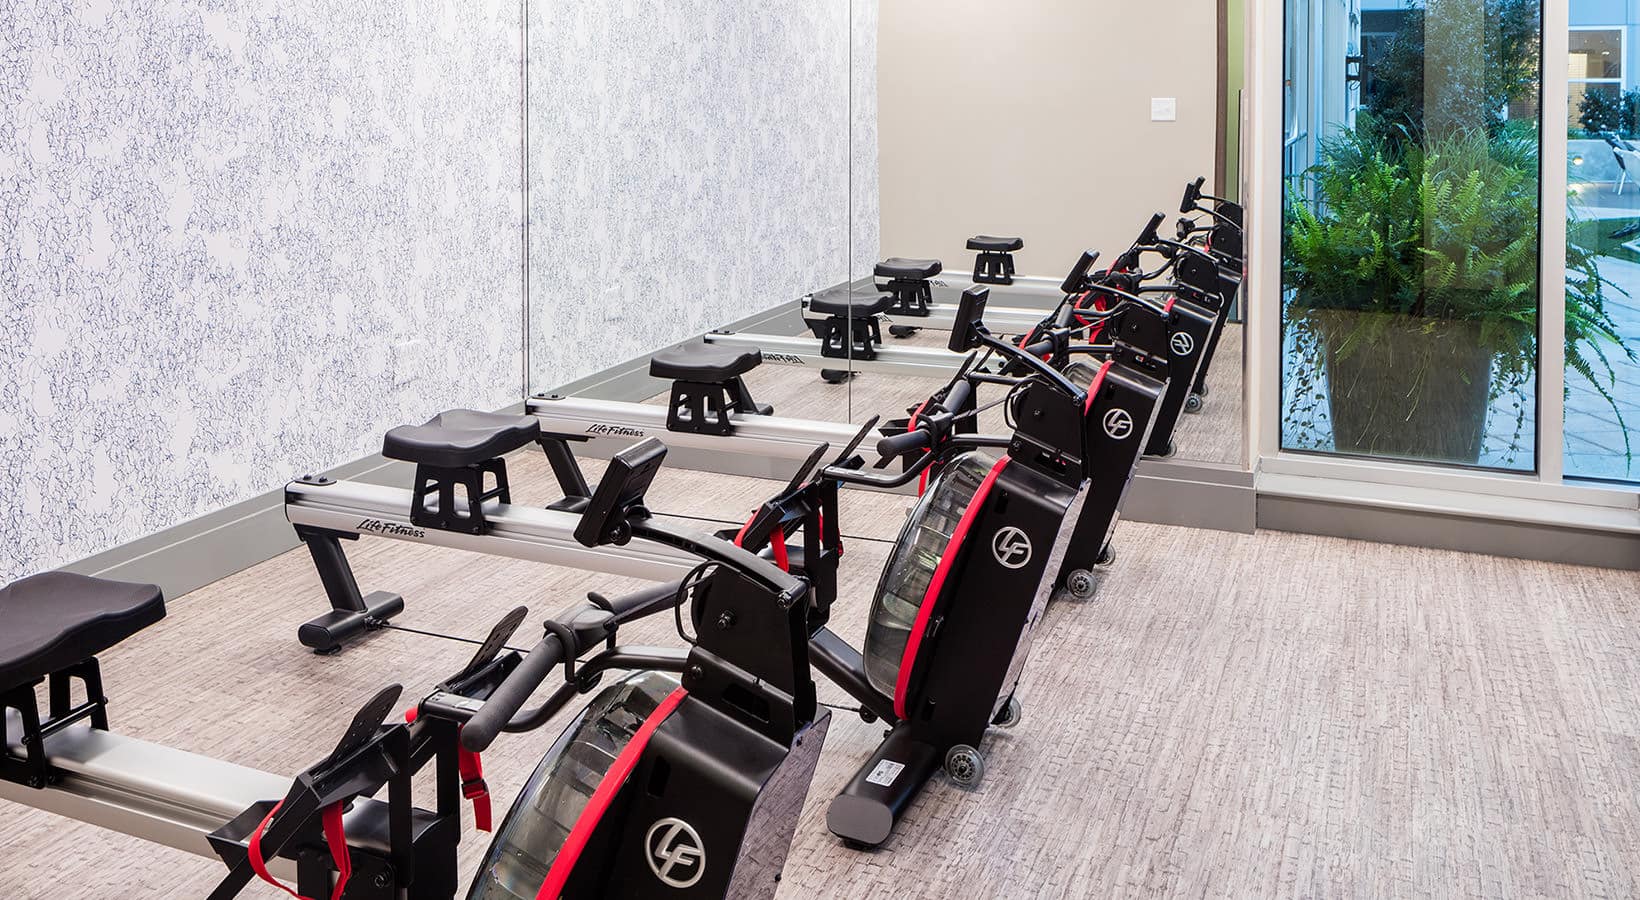 fitness area with row of equipment for working out